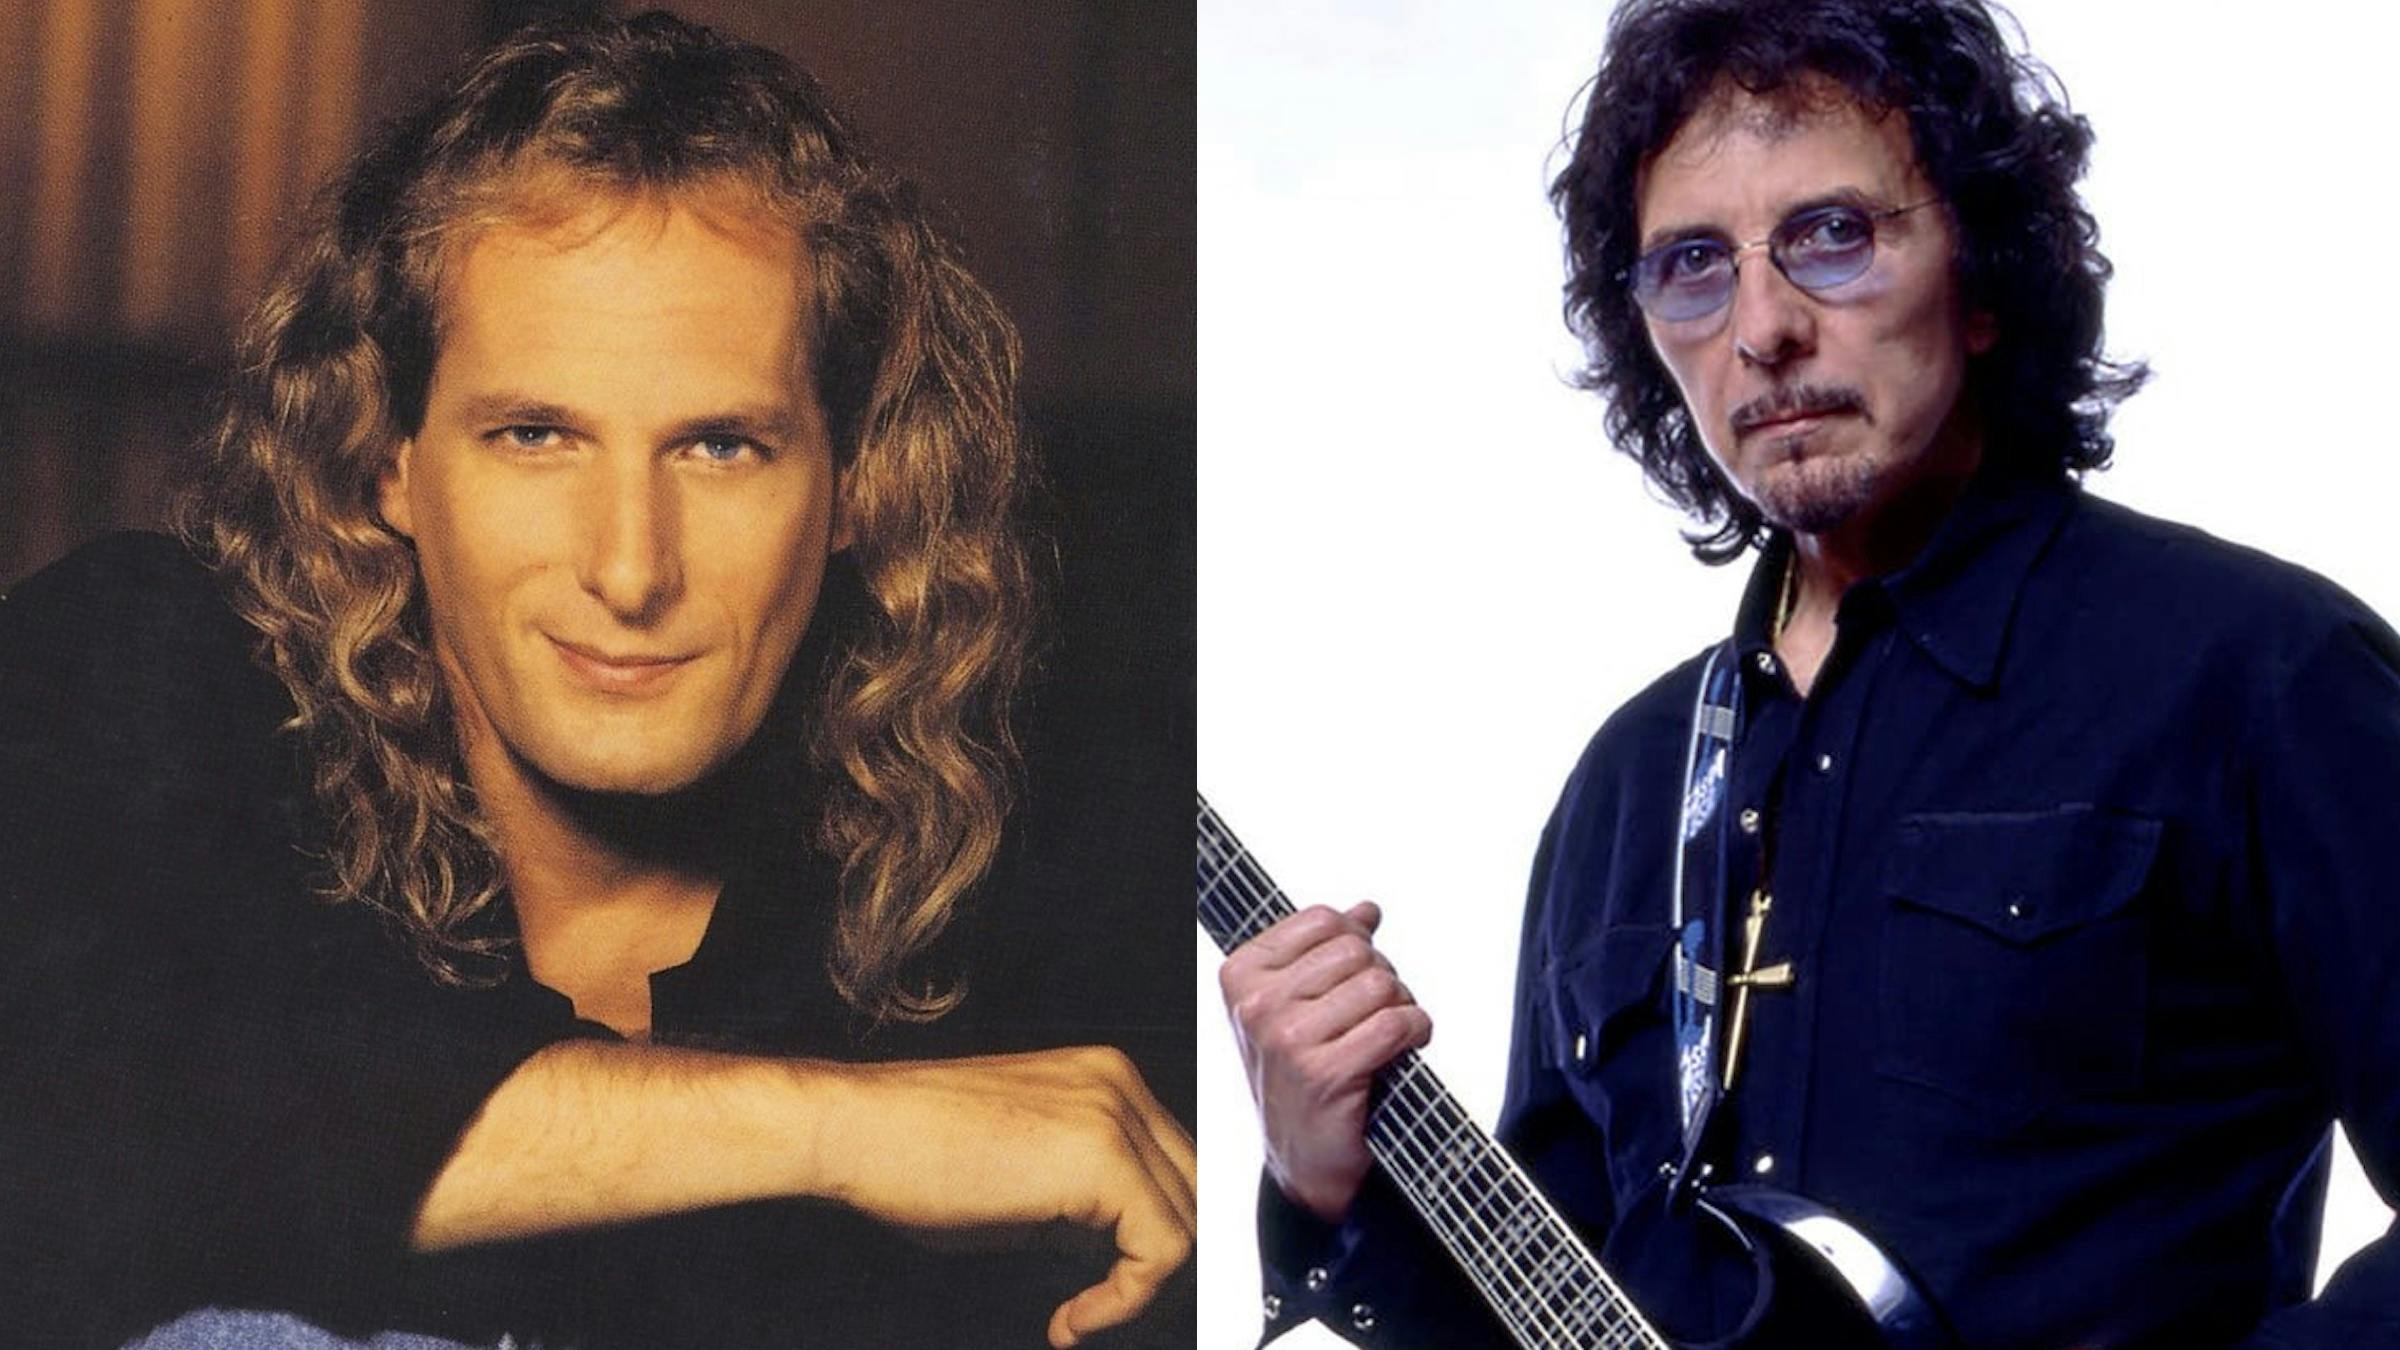 Michael Bolton Auditioned For Black Sabbath, According To Tony Iommi